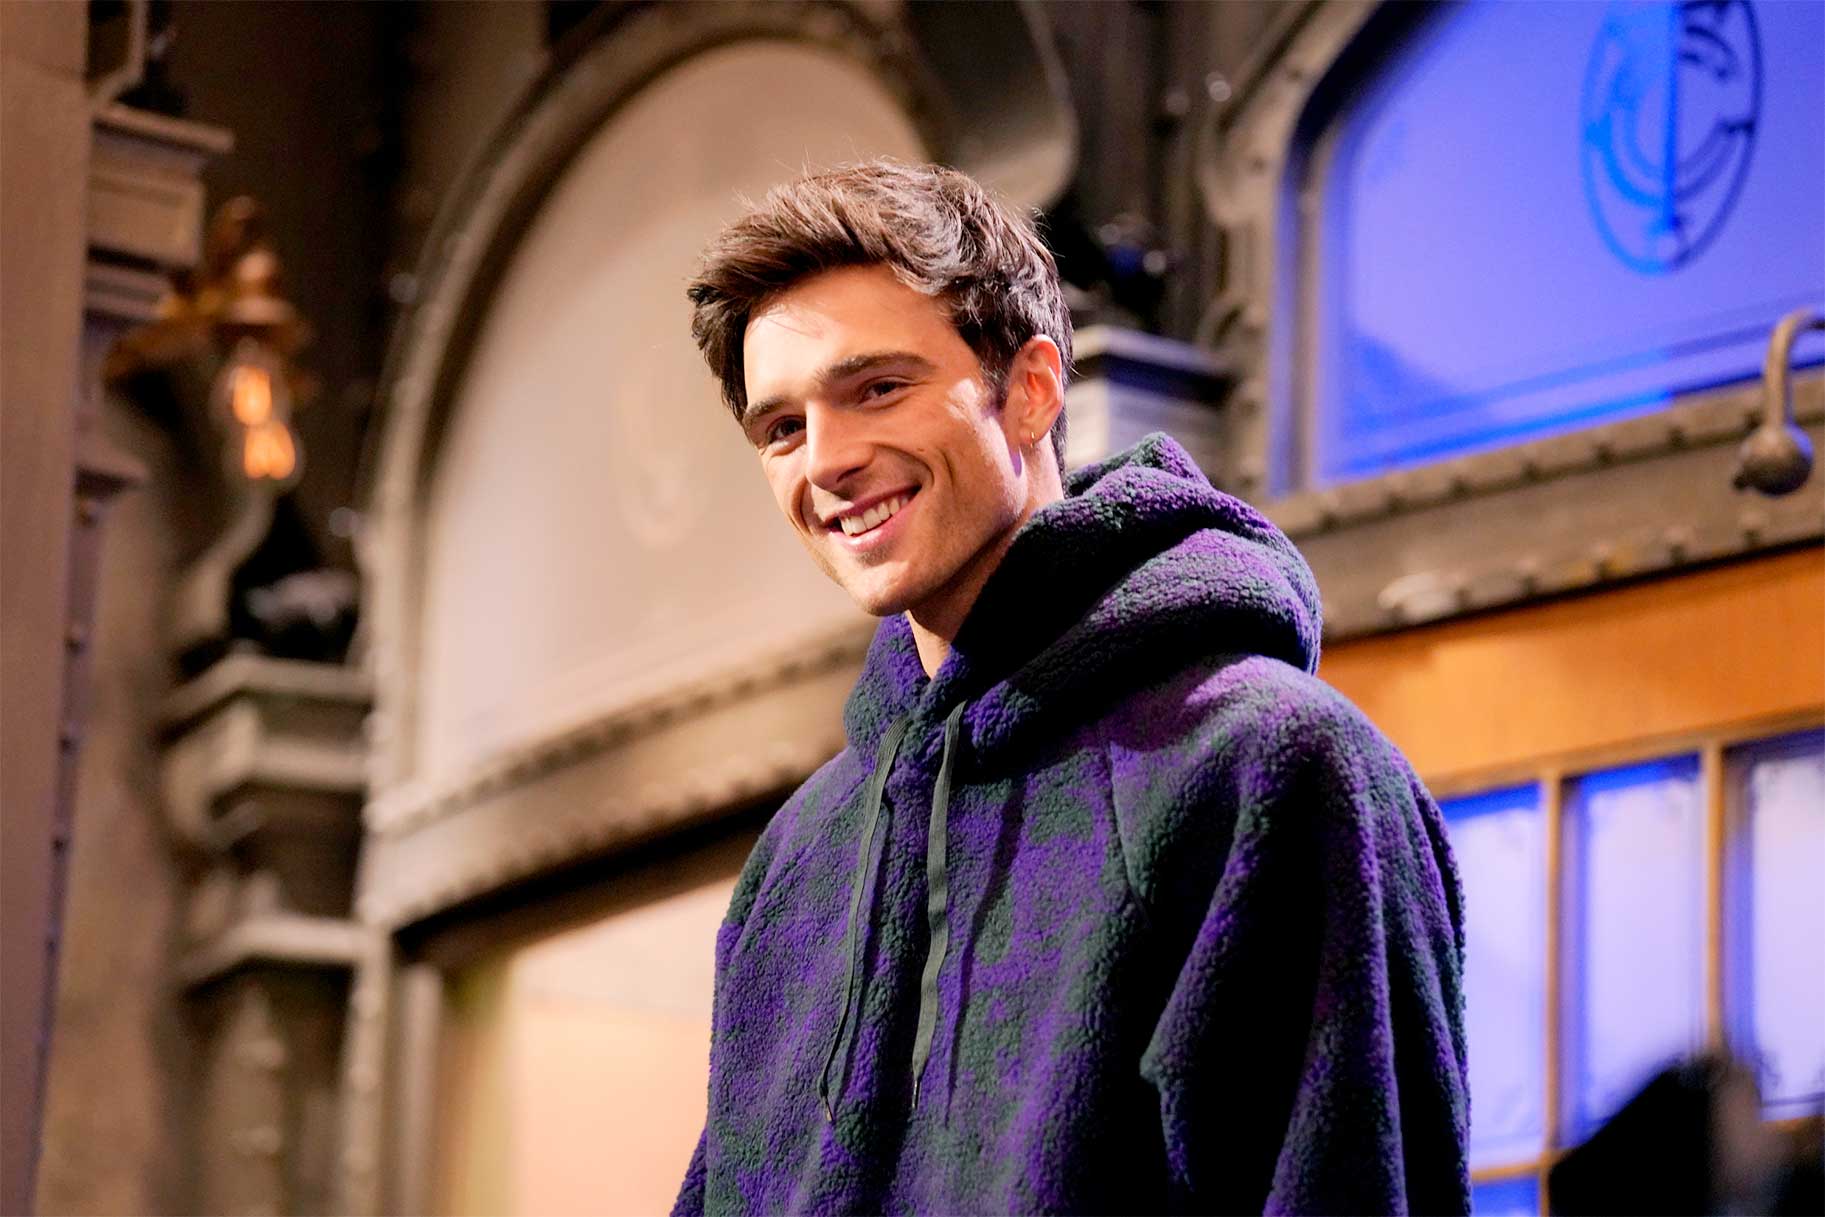 Watch Jacob Elordi Step Into the First SNL Episode of 2024 in New Promo